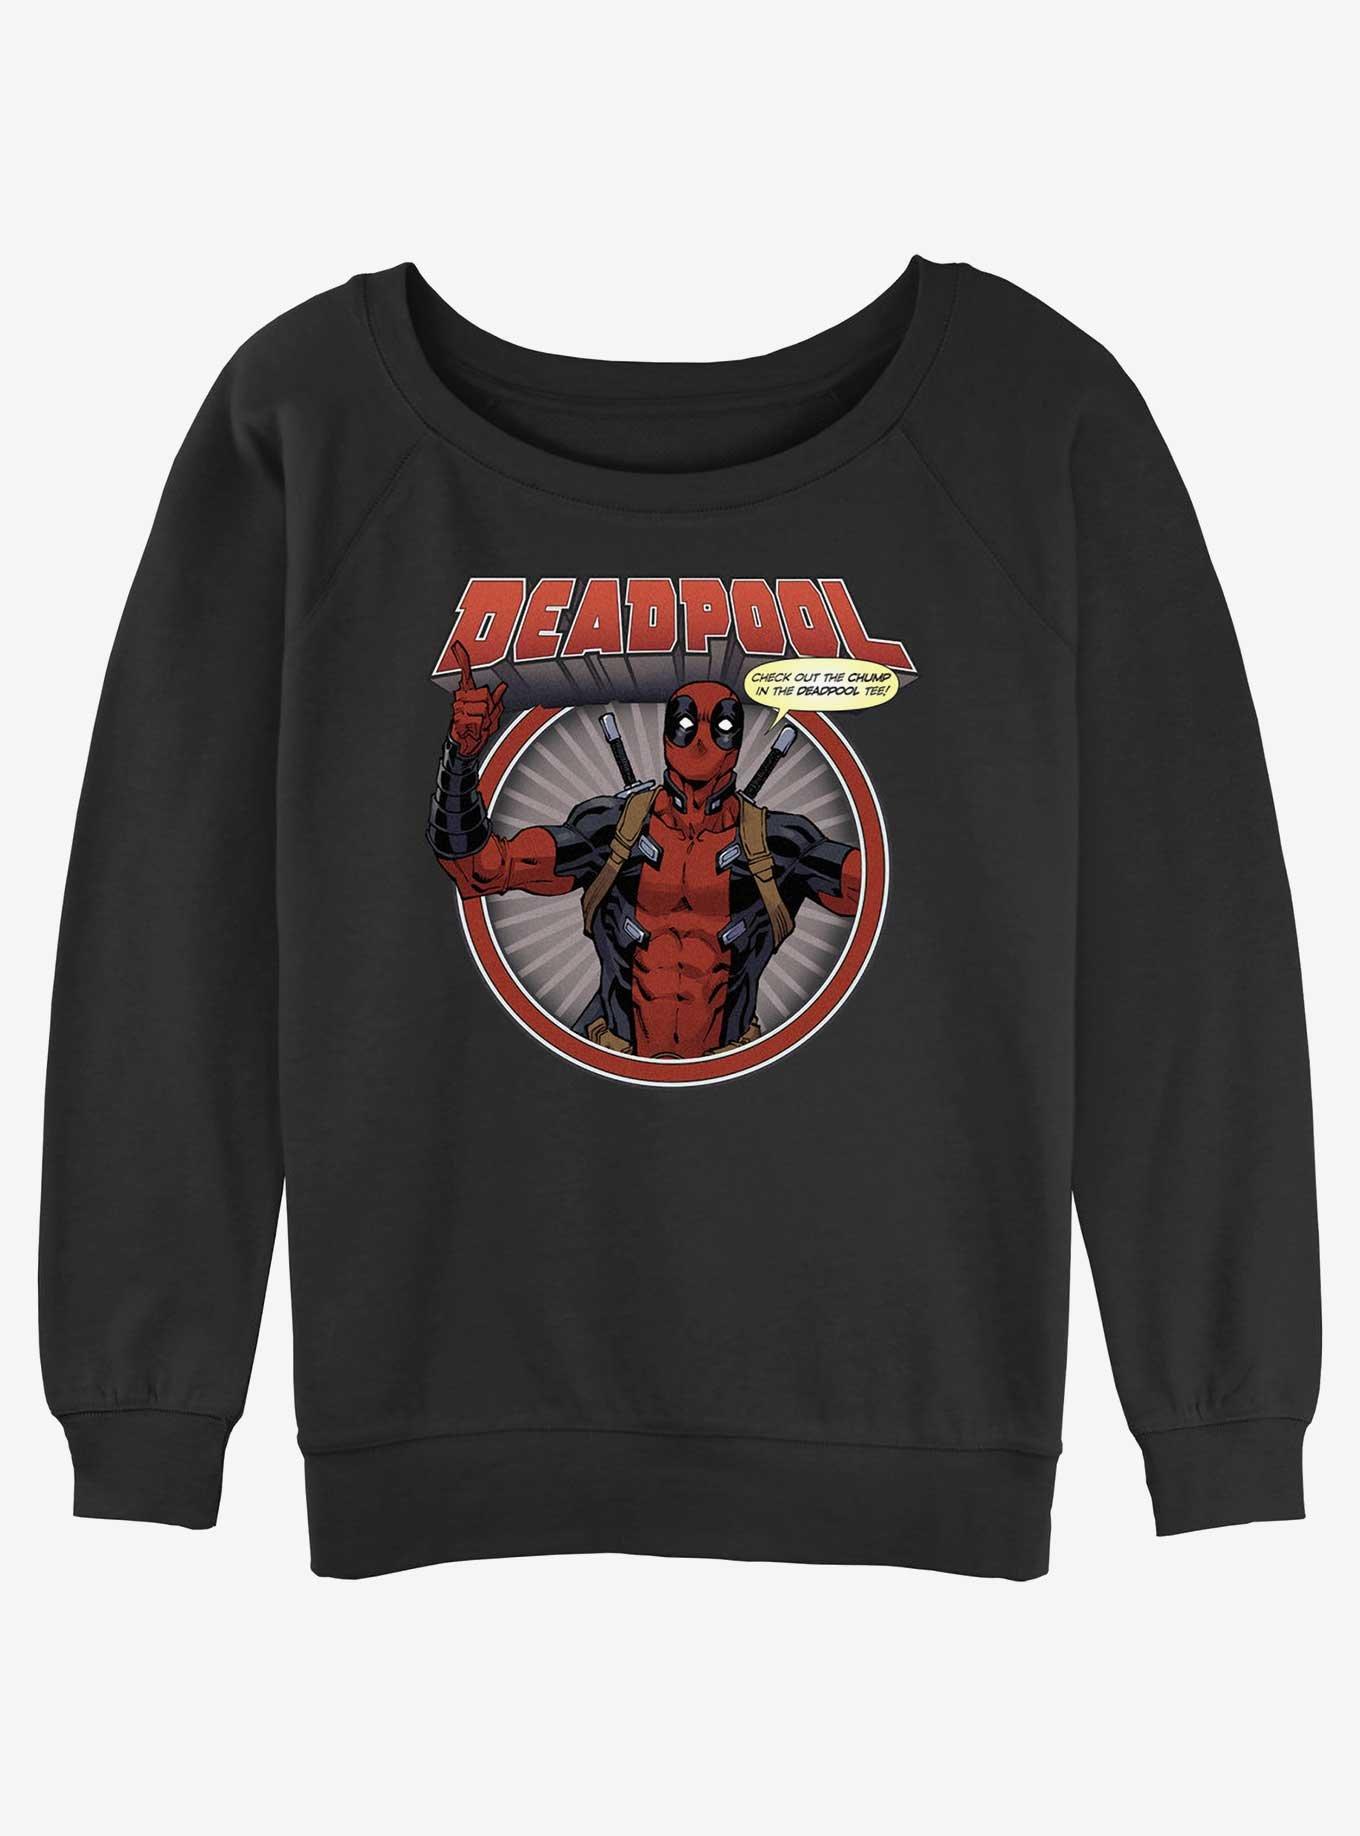 Marvel Deadpool Check Out The Chump Womens Slouchy Sweatshirt, BLACK, hi-res